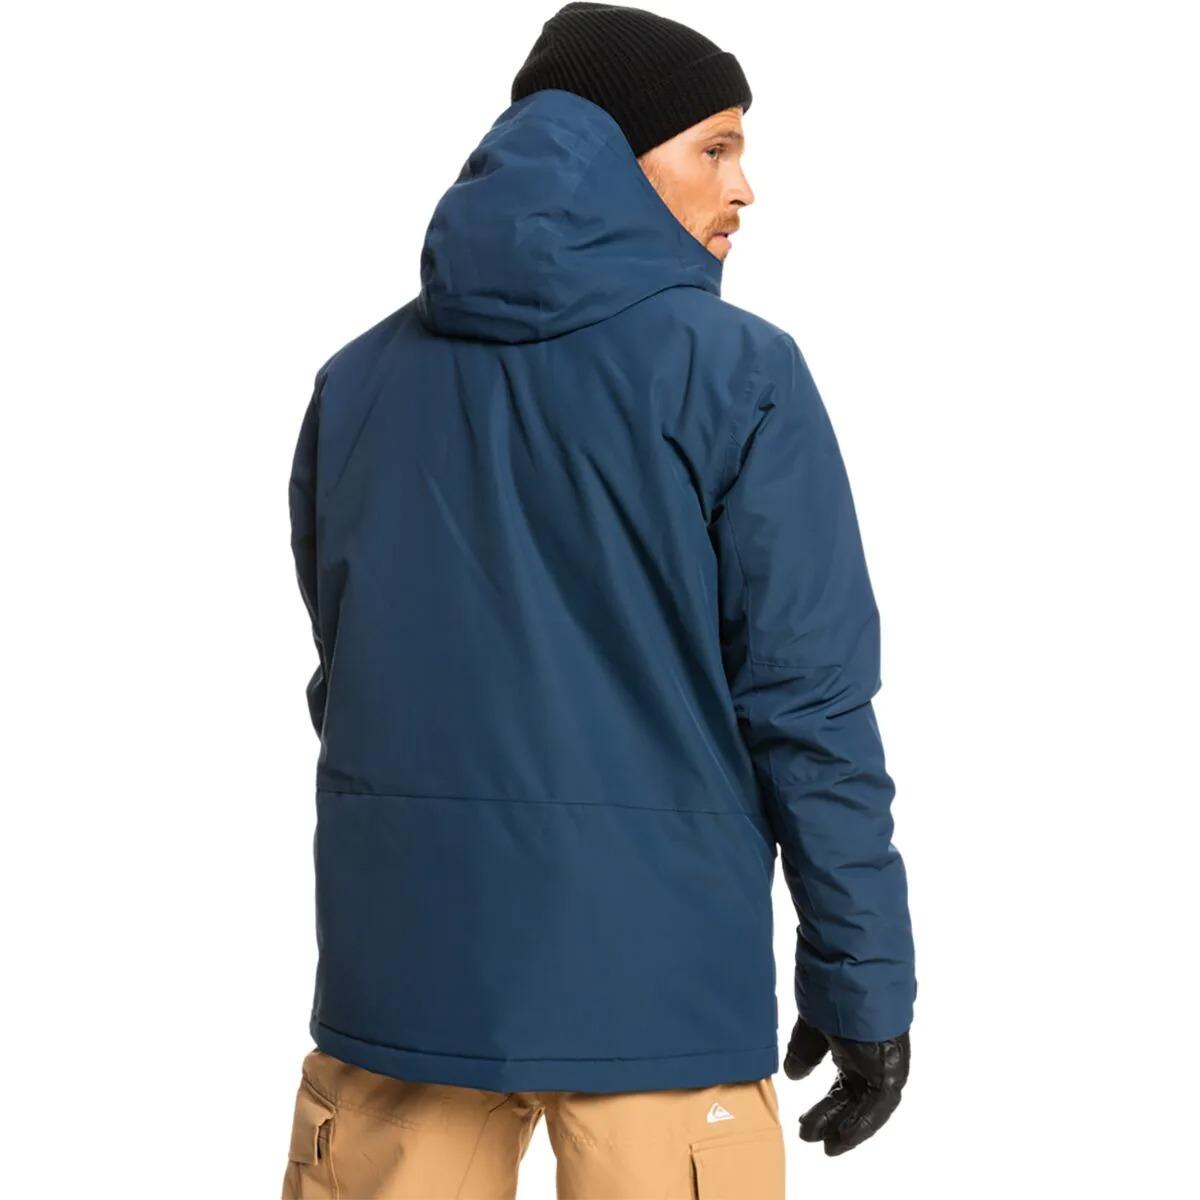 Quiksilver Mission Solid Insulated Jacket - Men's